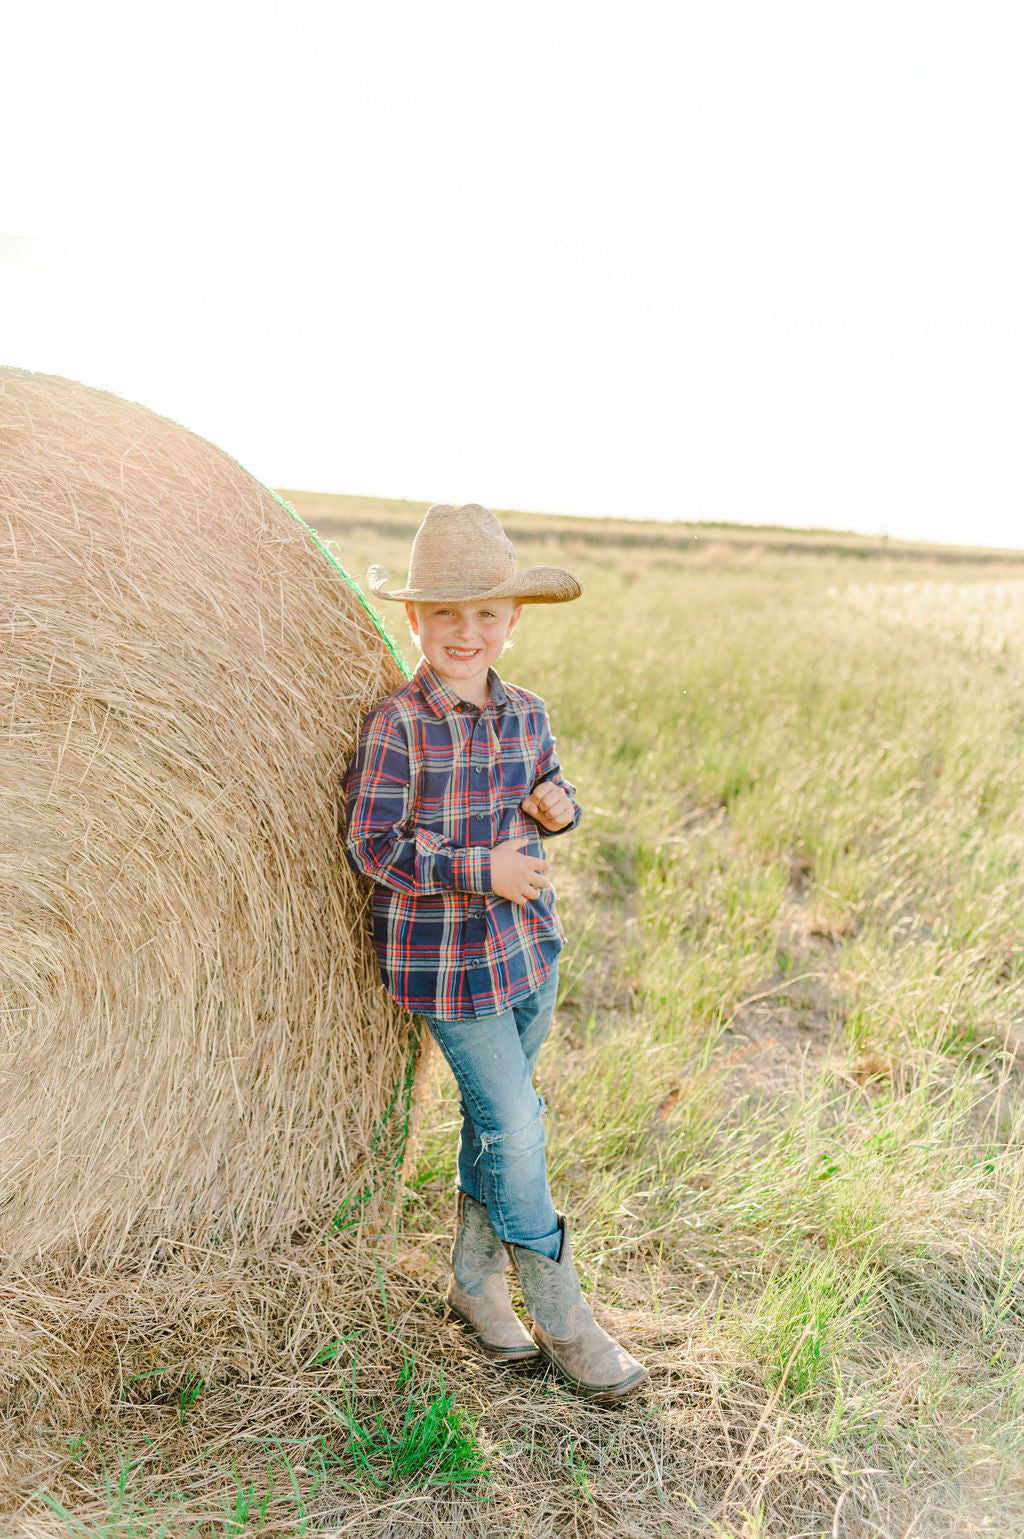 Boy with a cowboy hat standing next to a hay bale on stick leg ranch